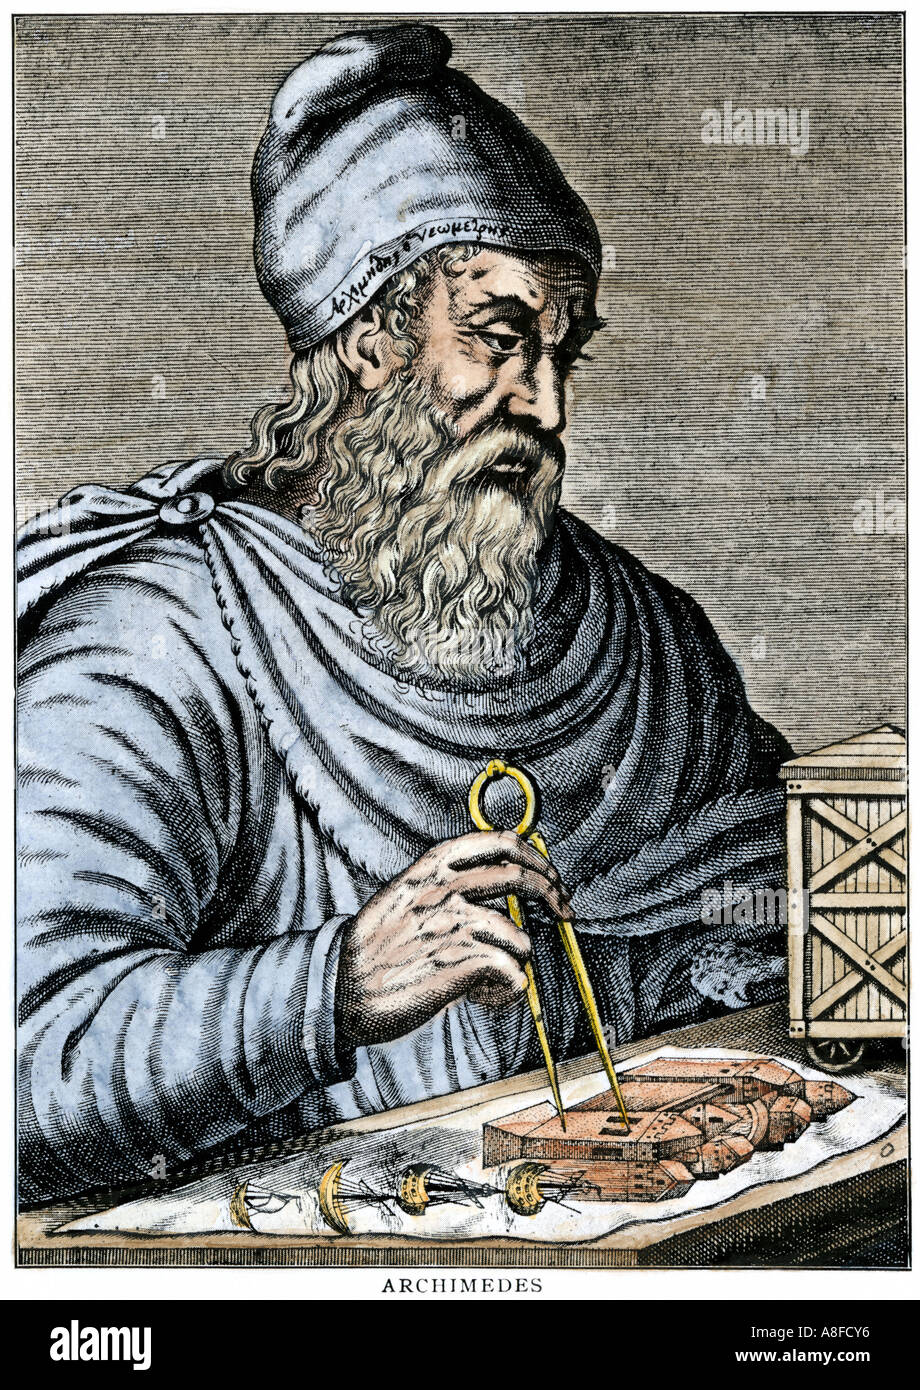 archimedes-using-calipers-in-ancient-greece-A8FCY6.jpg